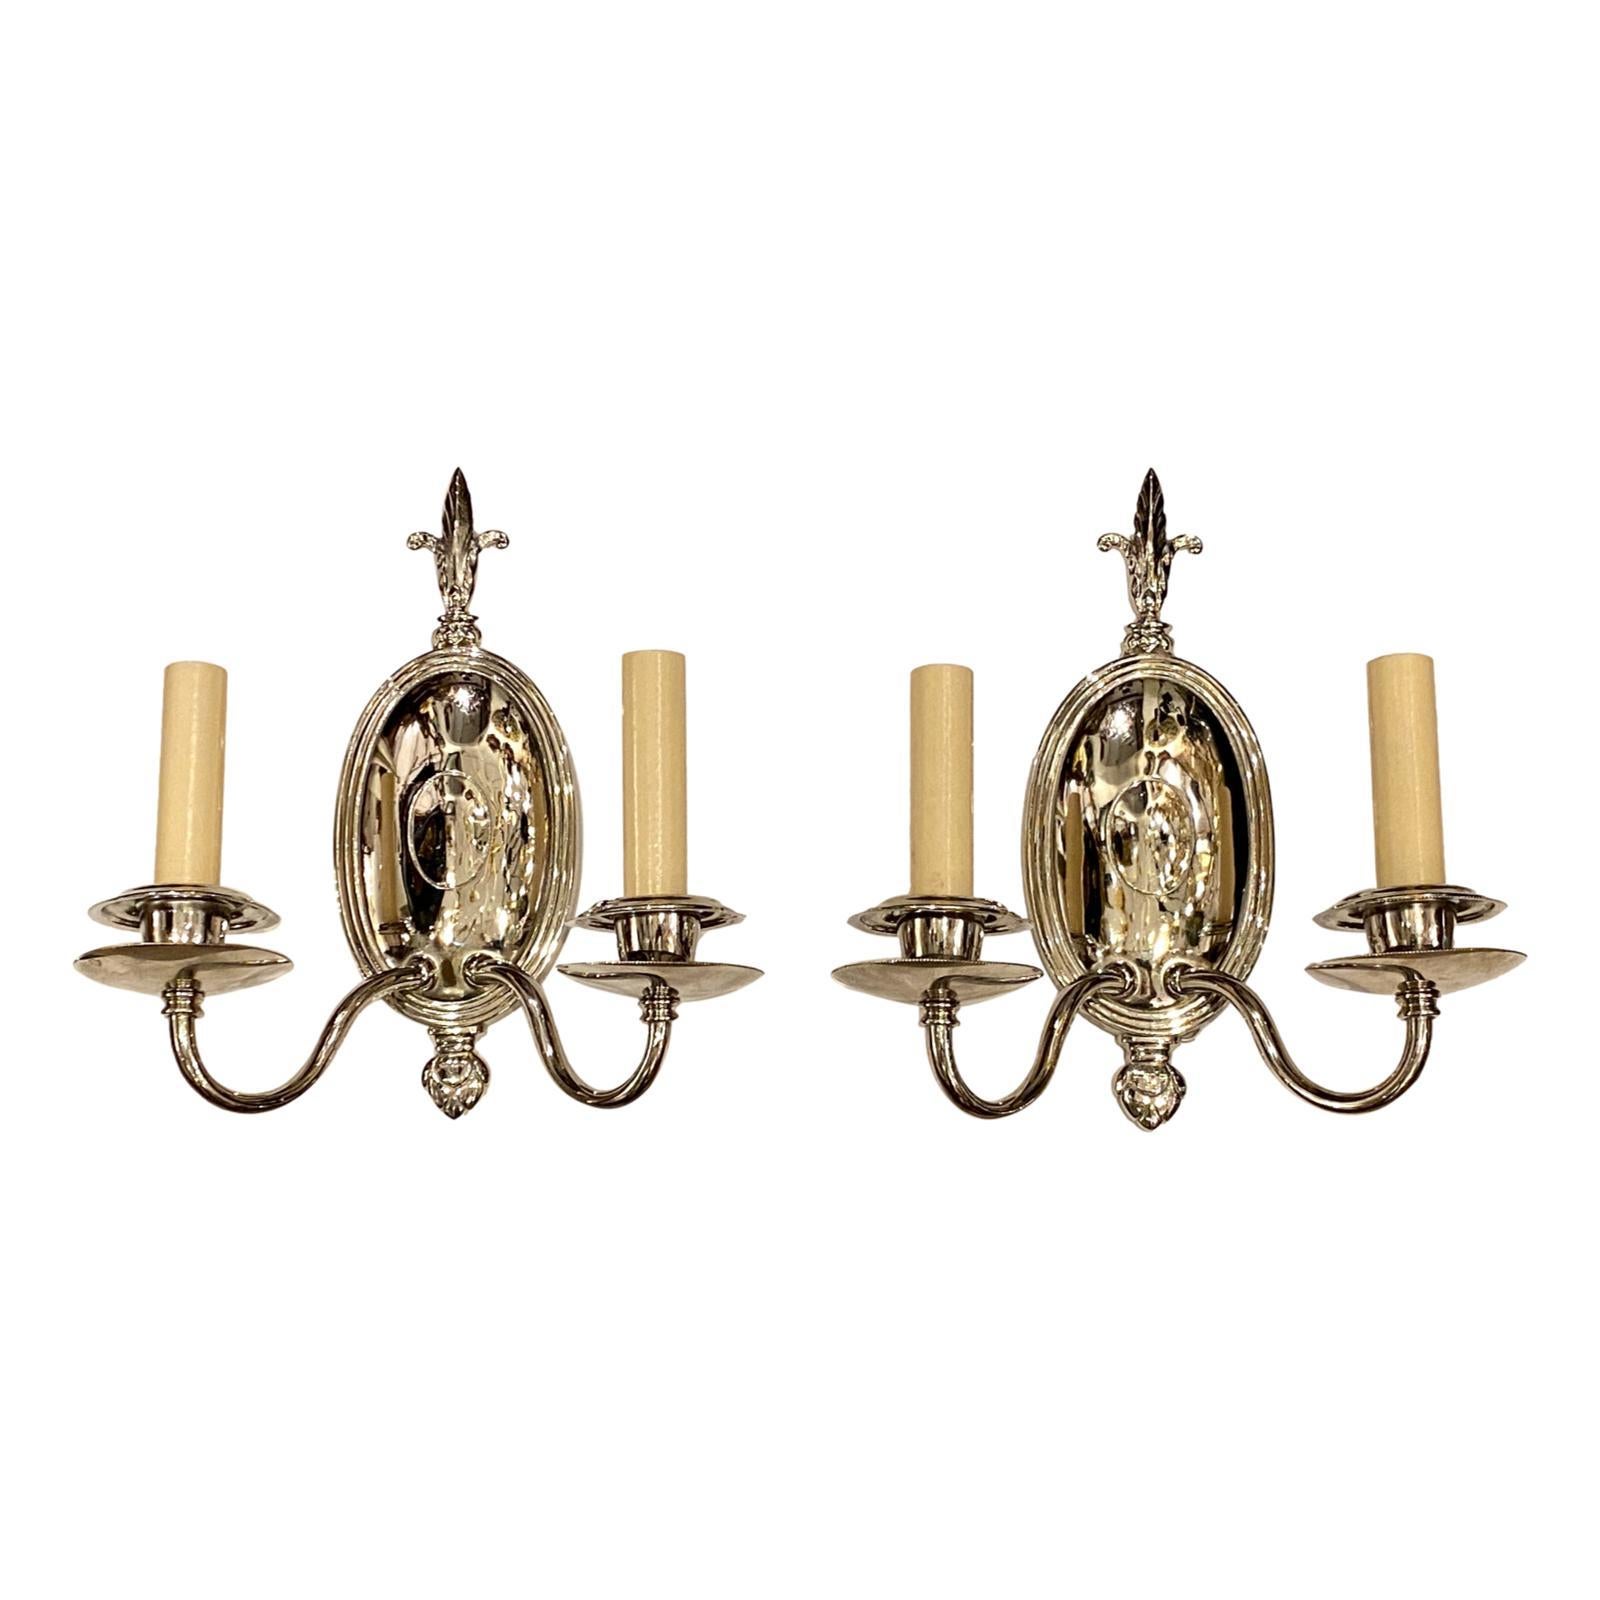 Pair of French Neoclassic Style Sconces